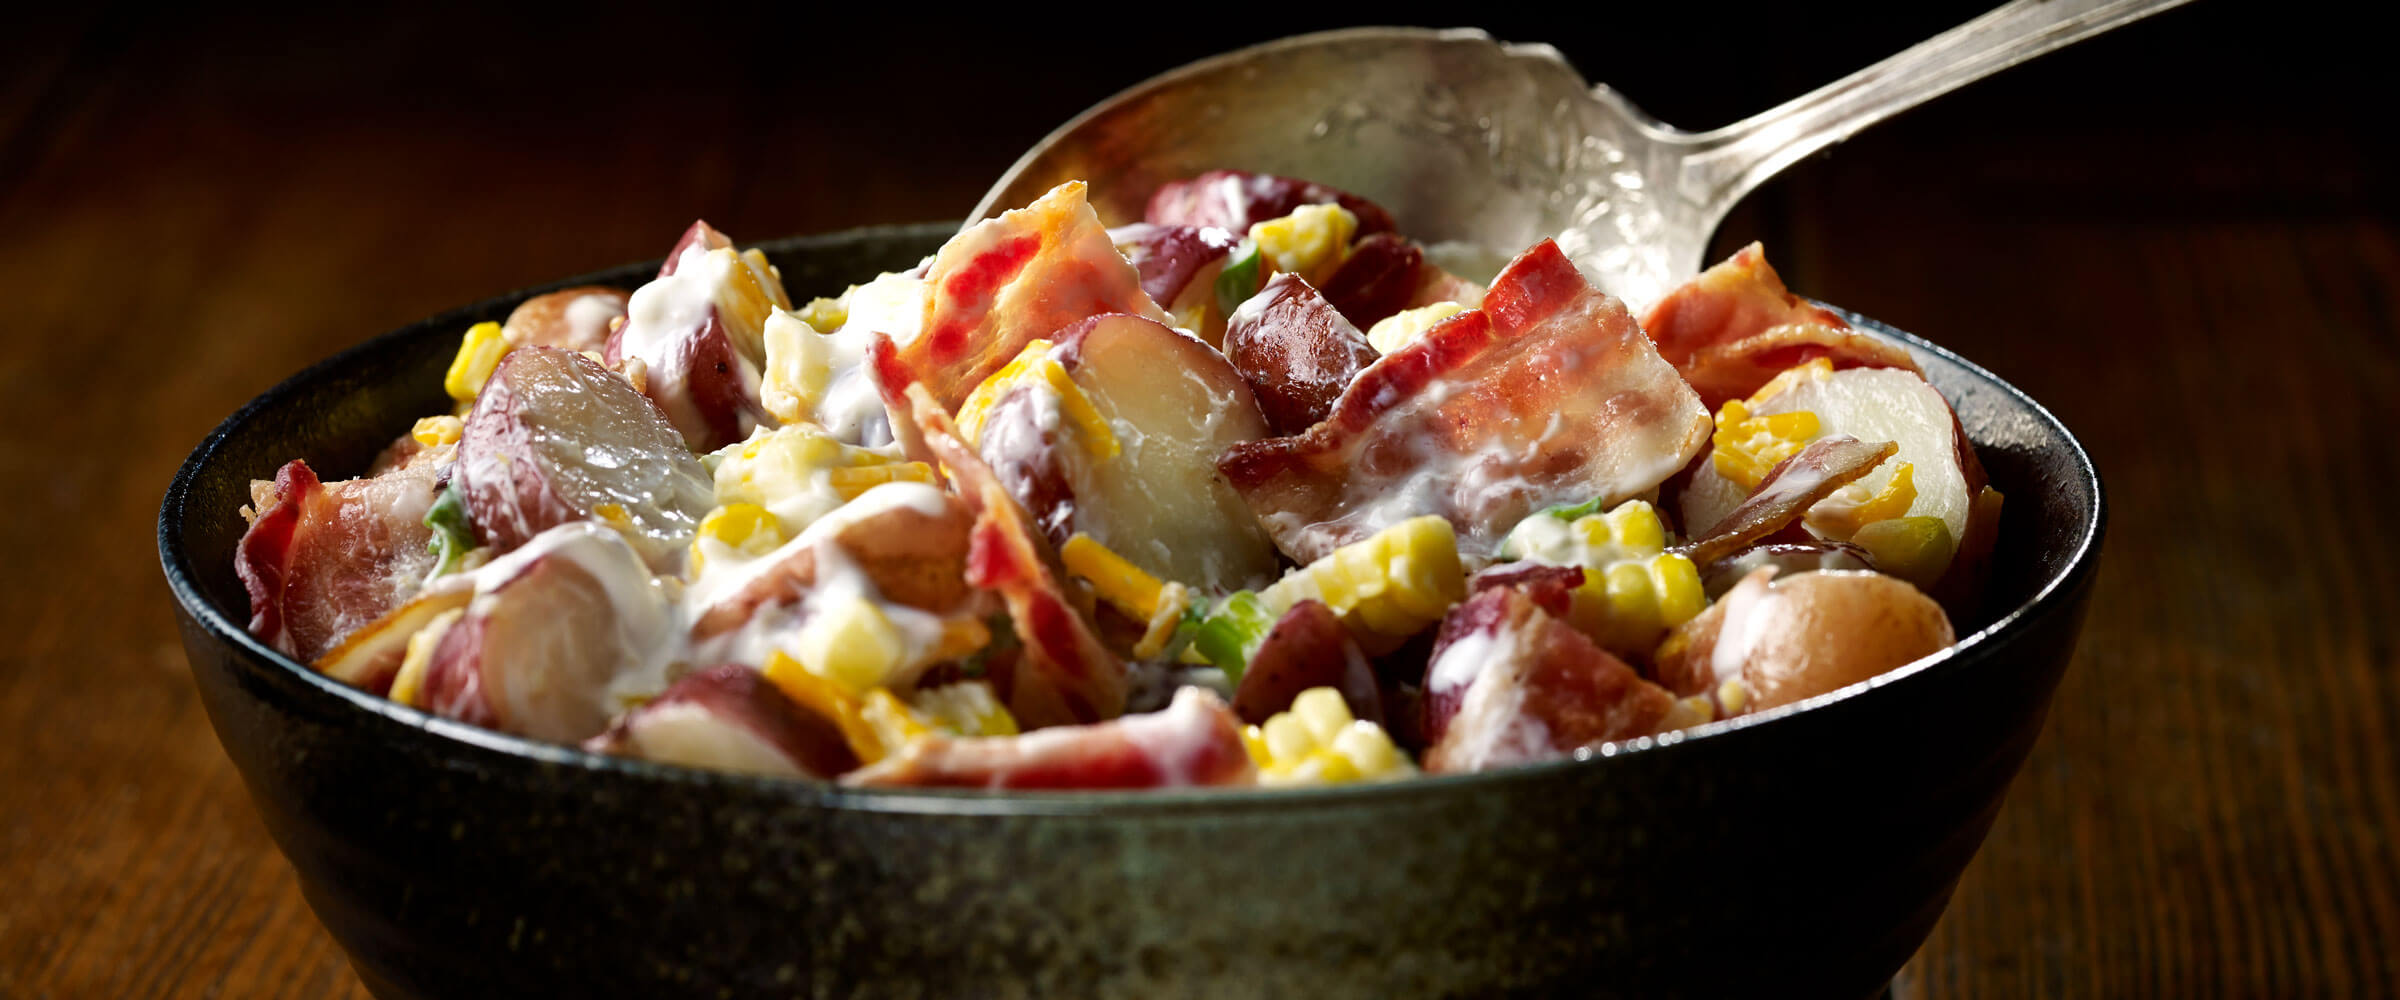 Bacon Potato Salad in bowl with serving spoon